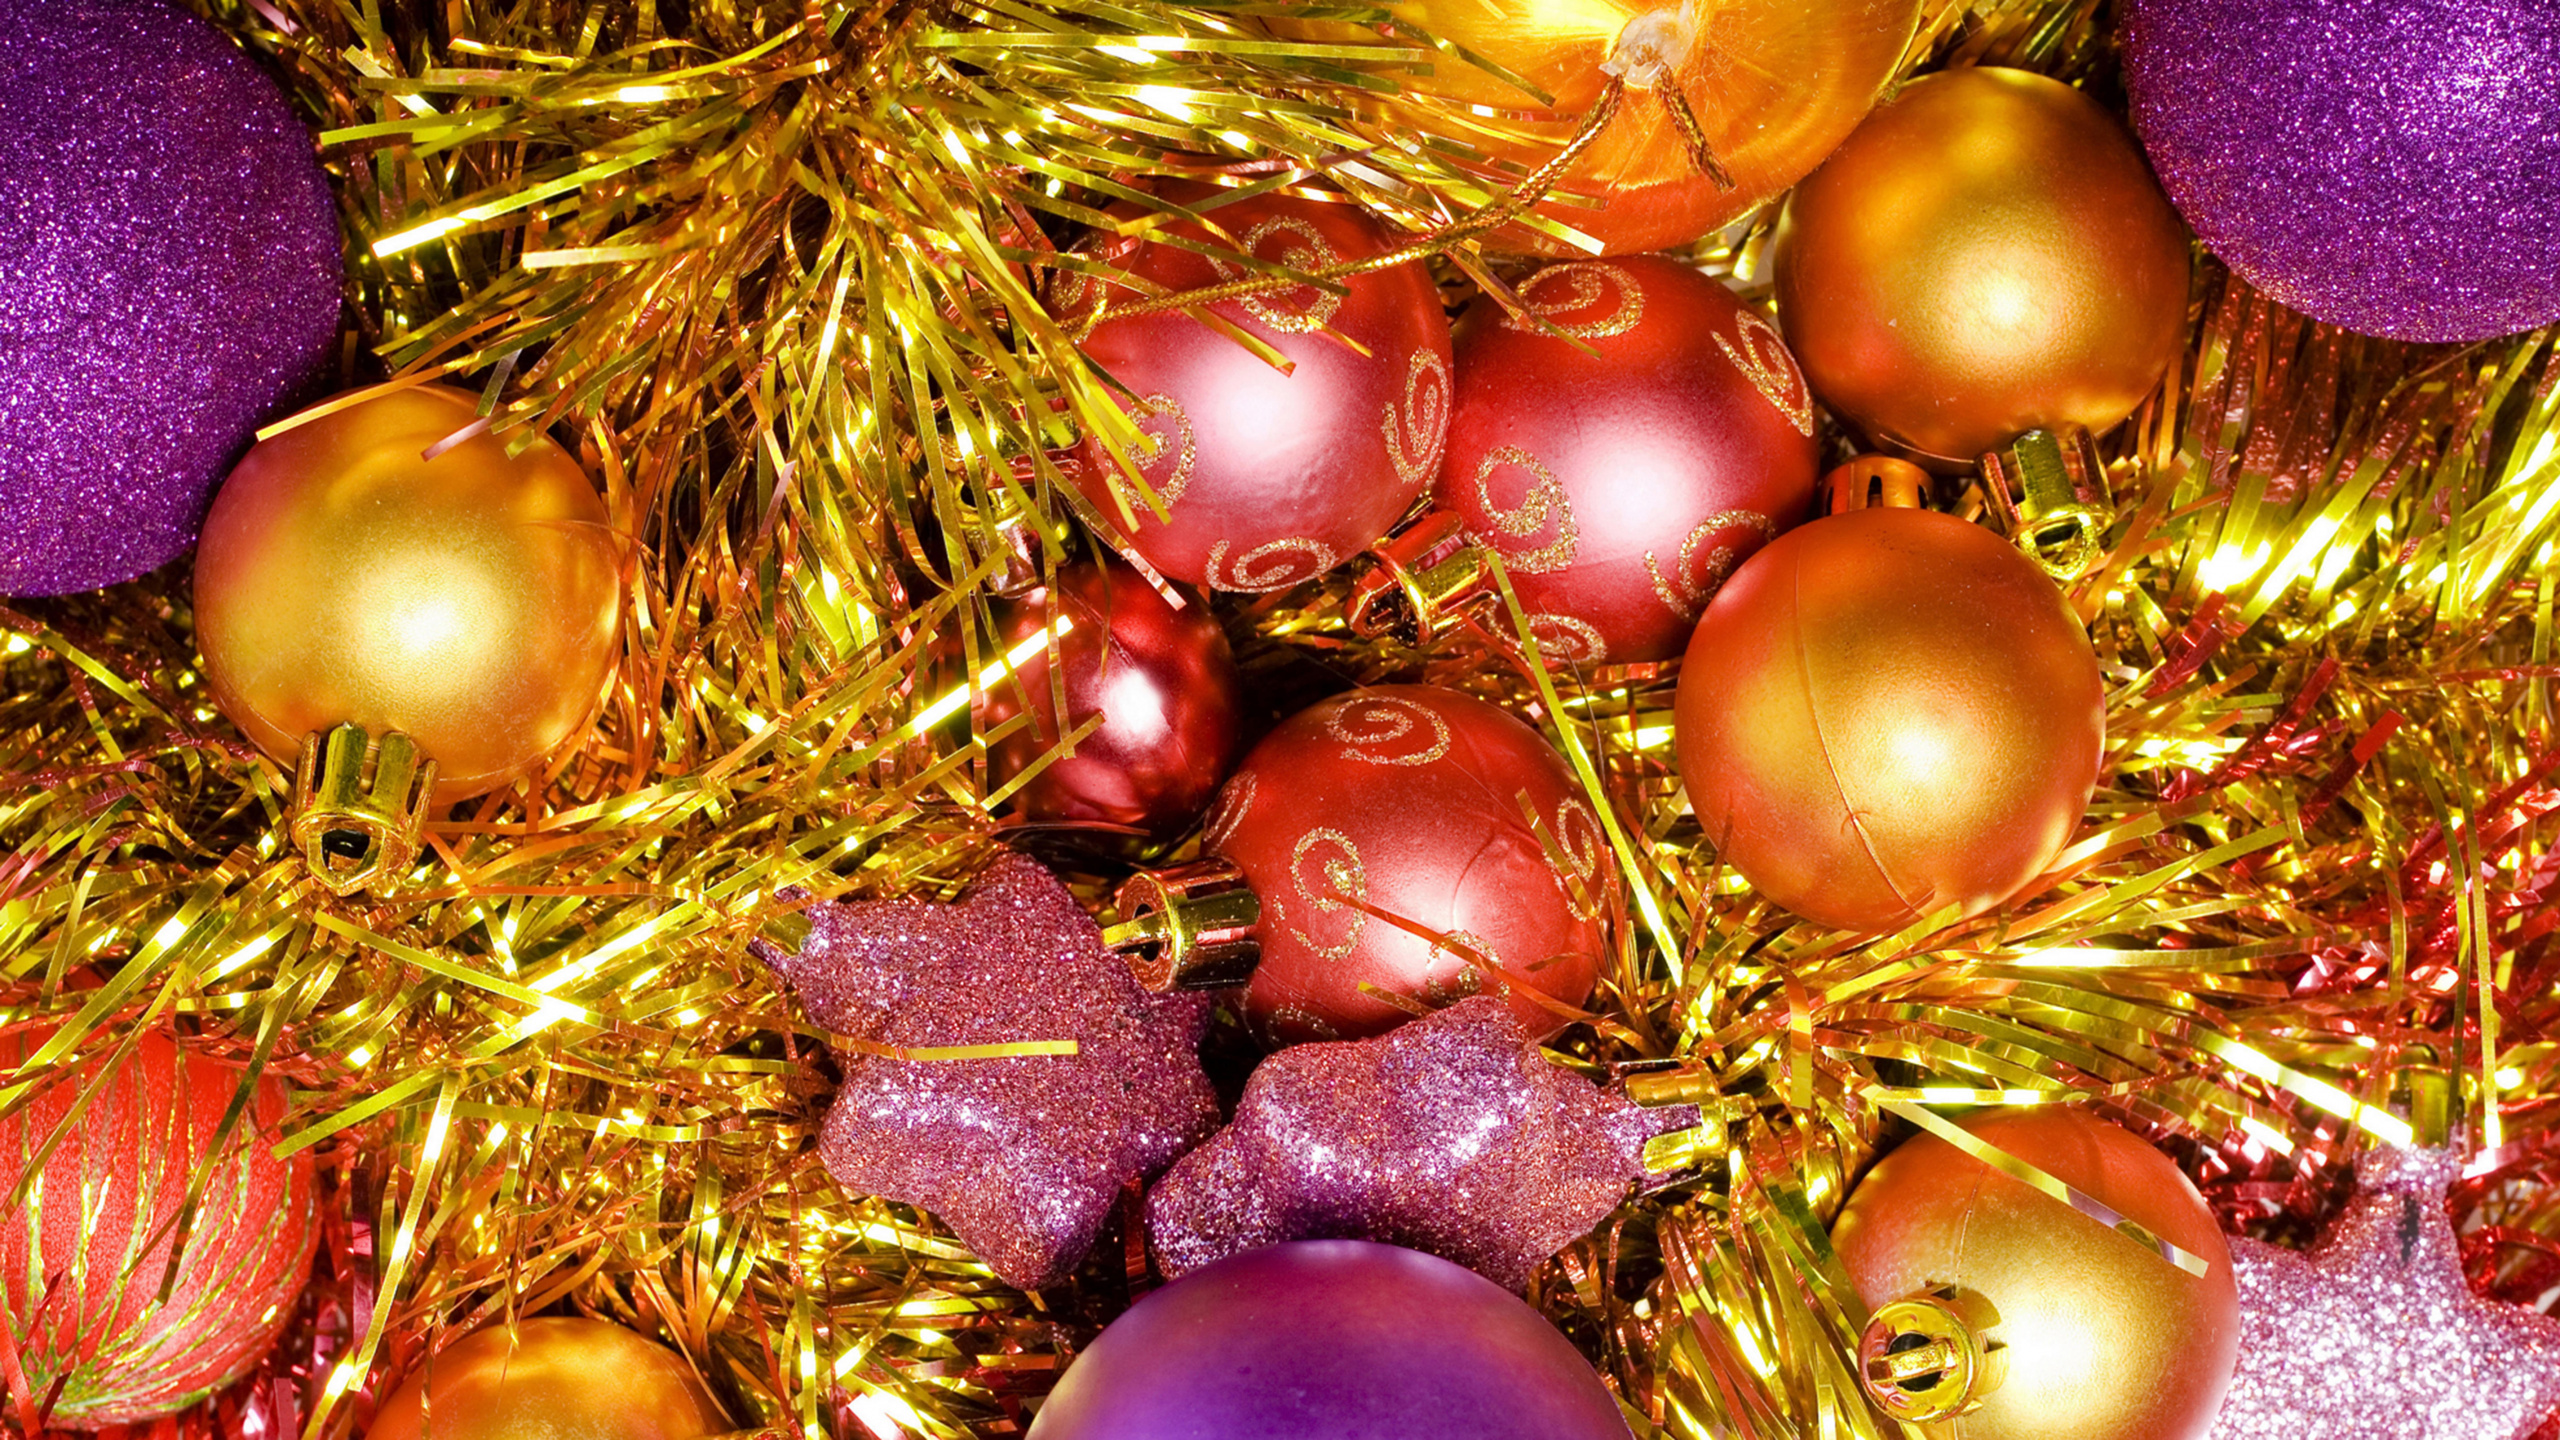 Christmas Day, Christmas Ornament, Christmas Tree, New Year, Holiday. Wallpaper in 2560x1440 Resolution